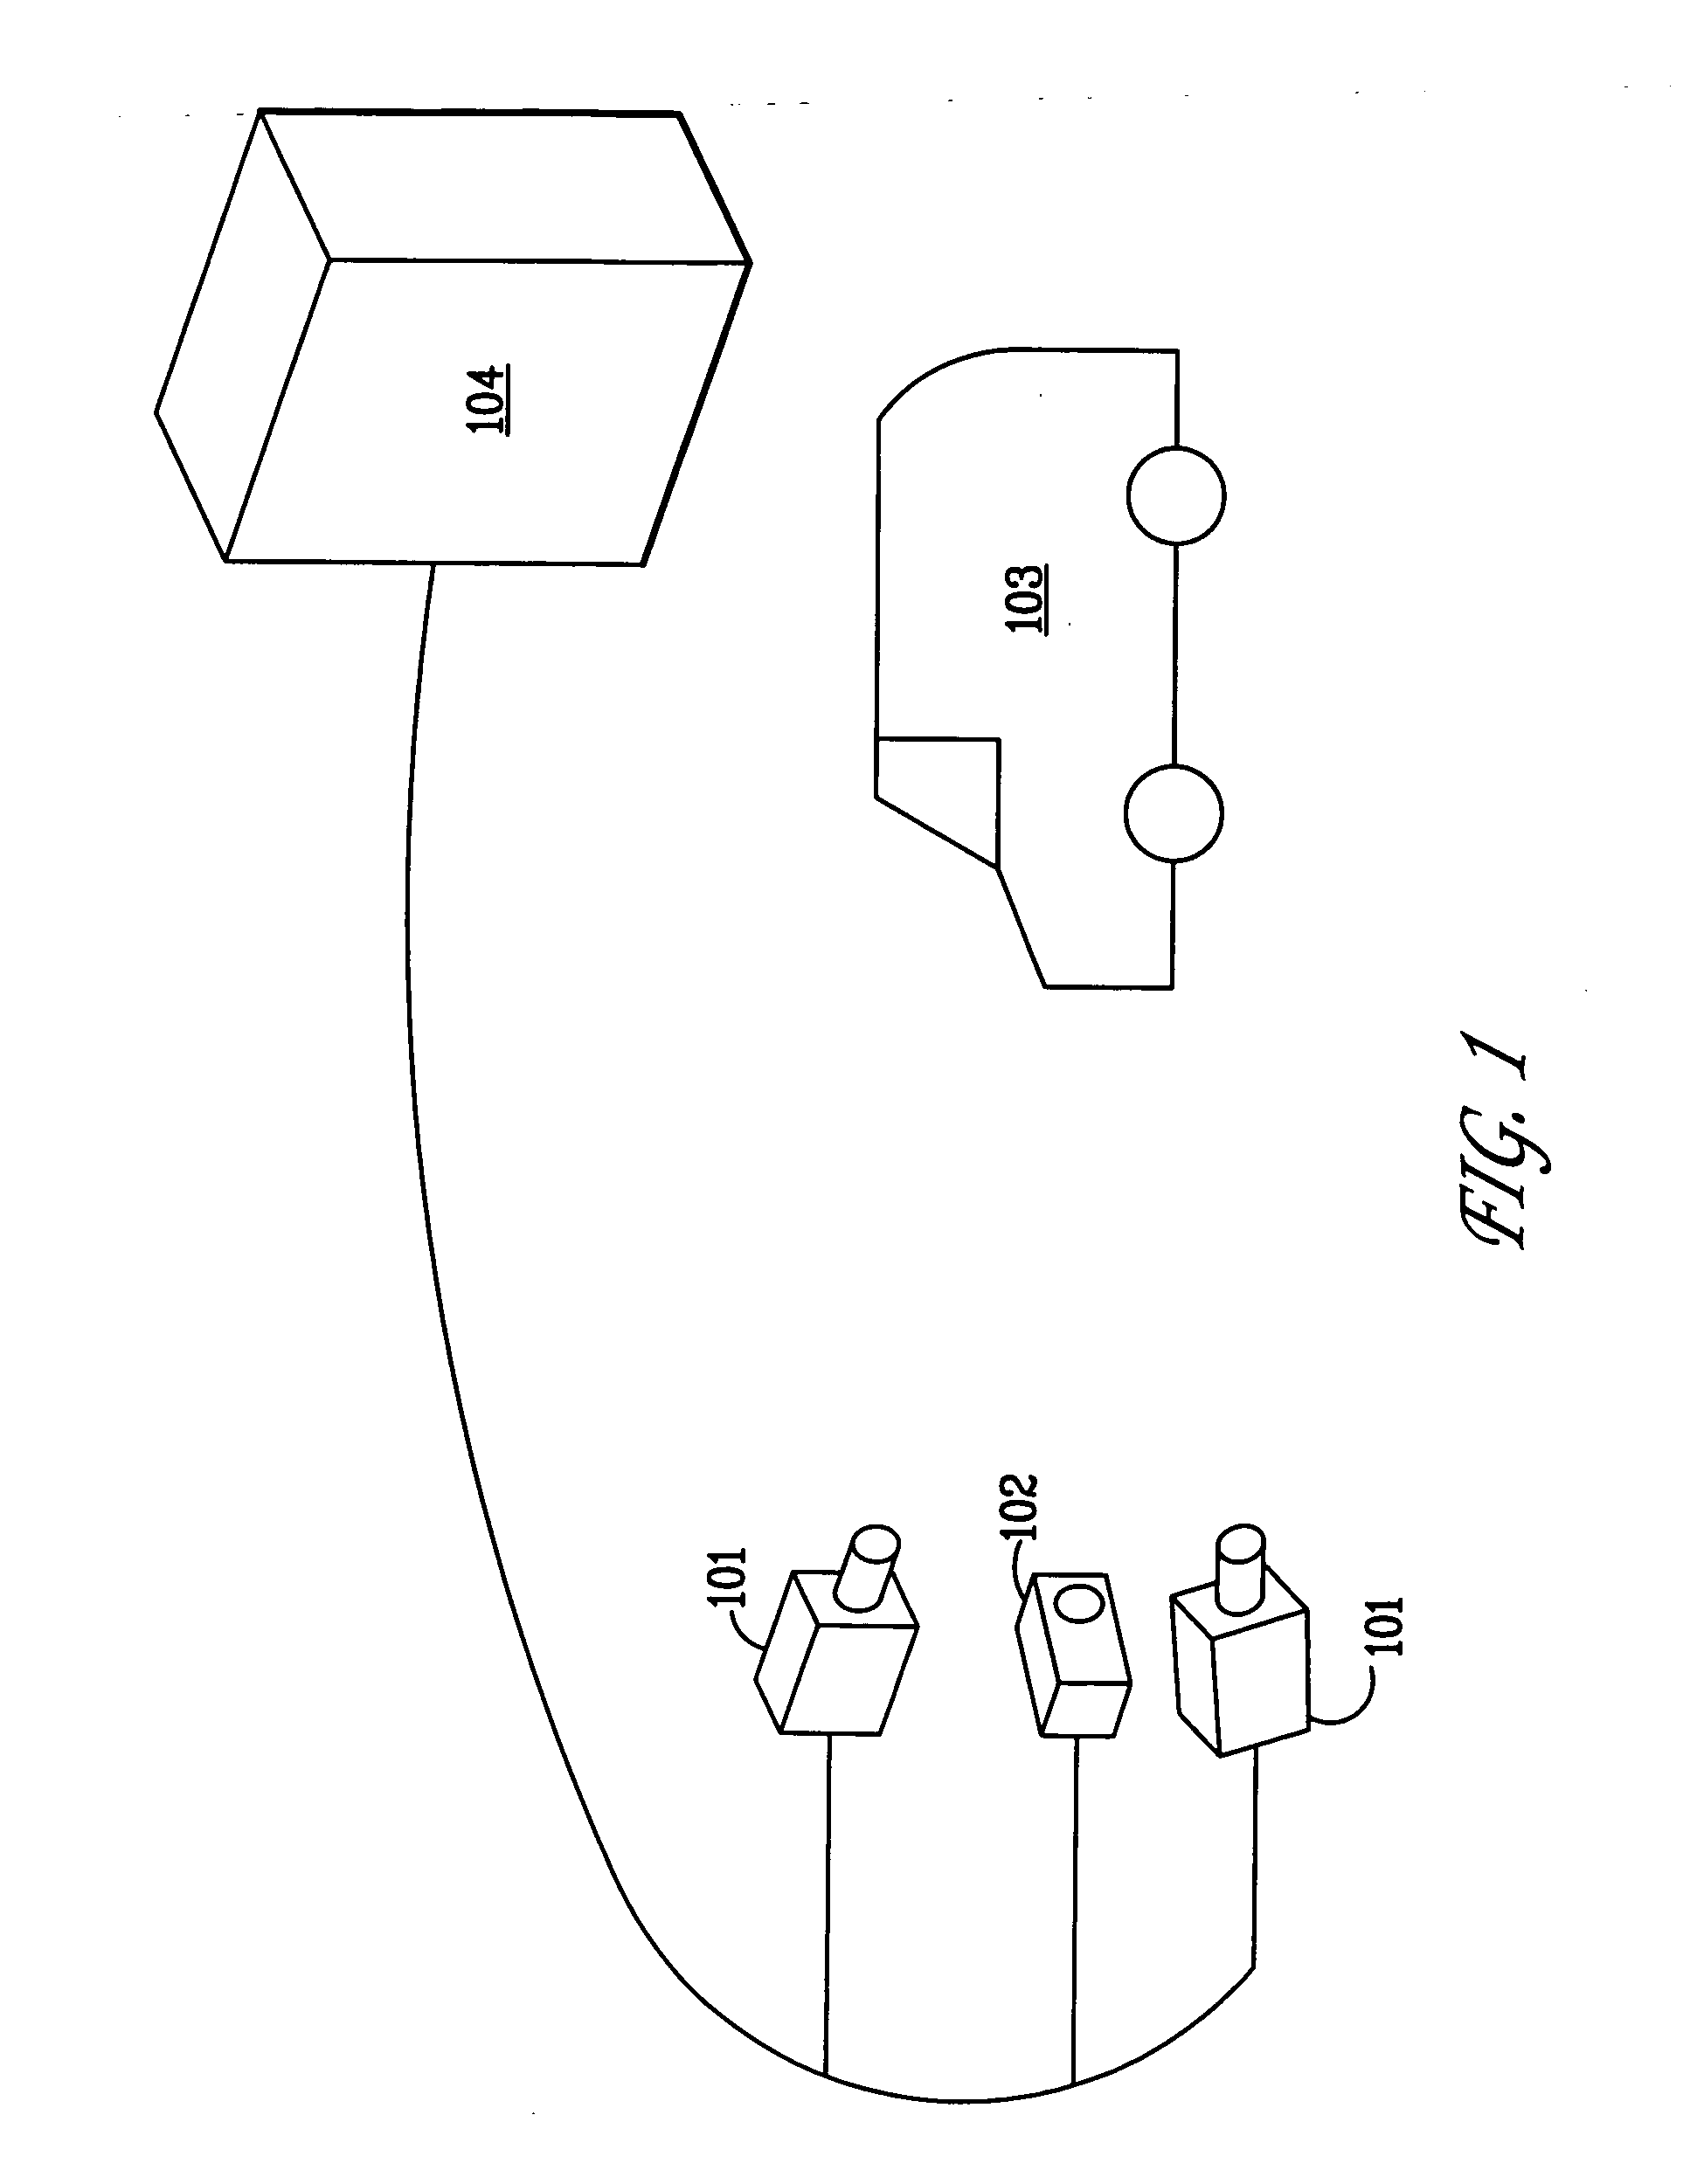 System and method for 3D object recognition using range and intensity